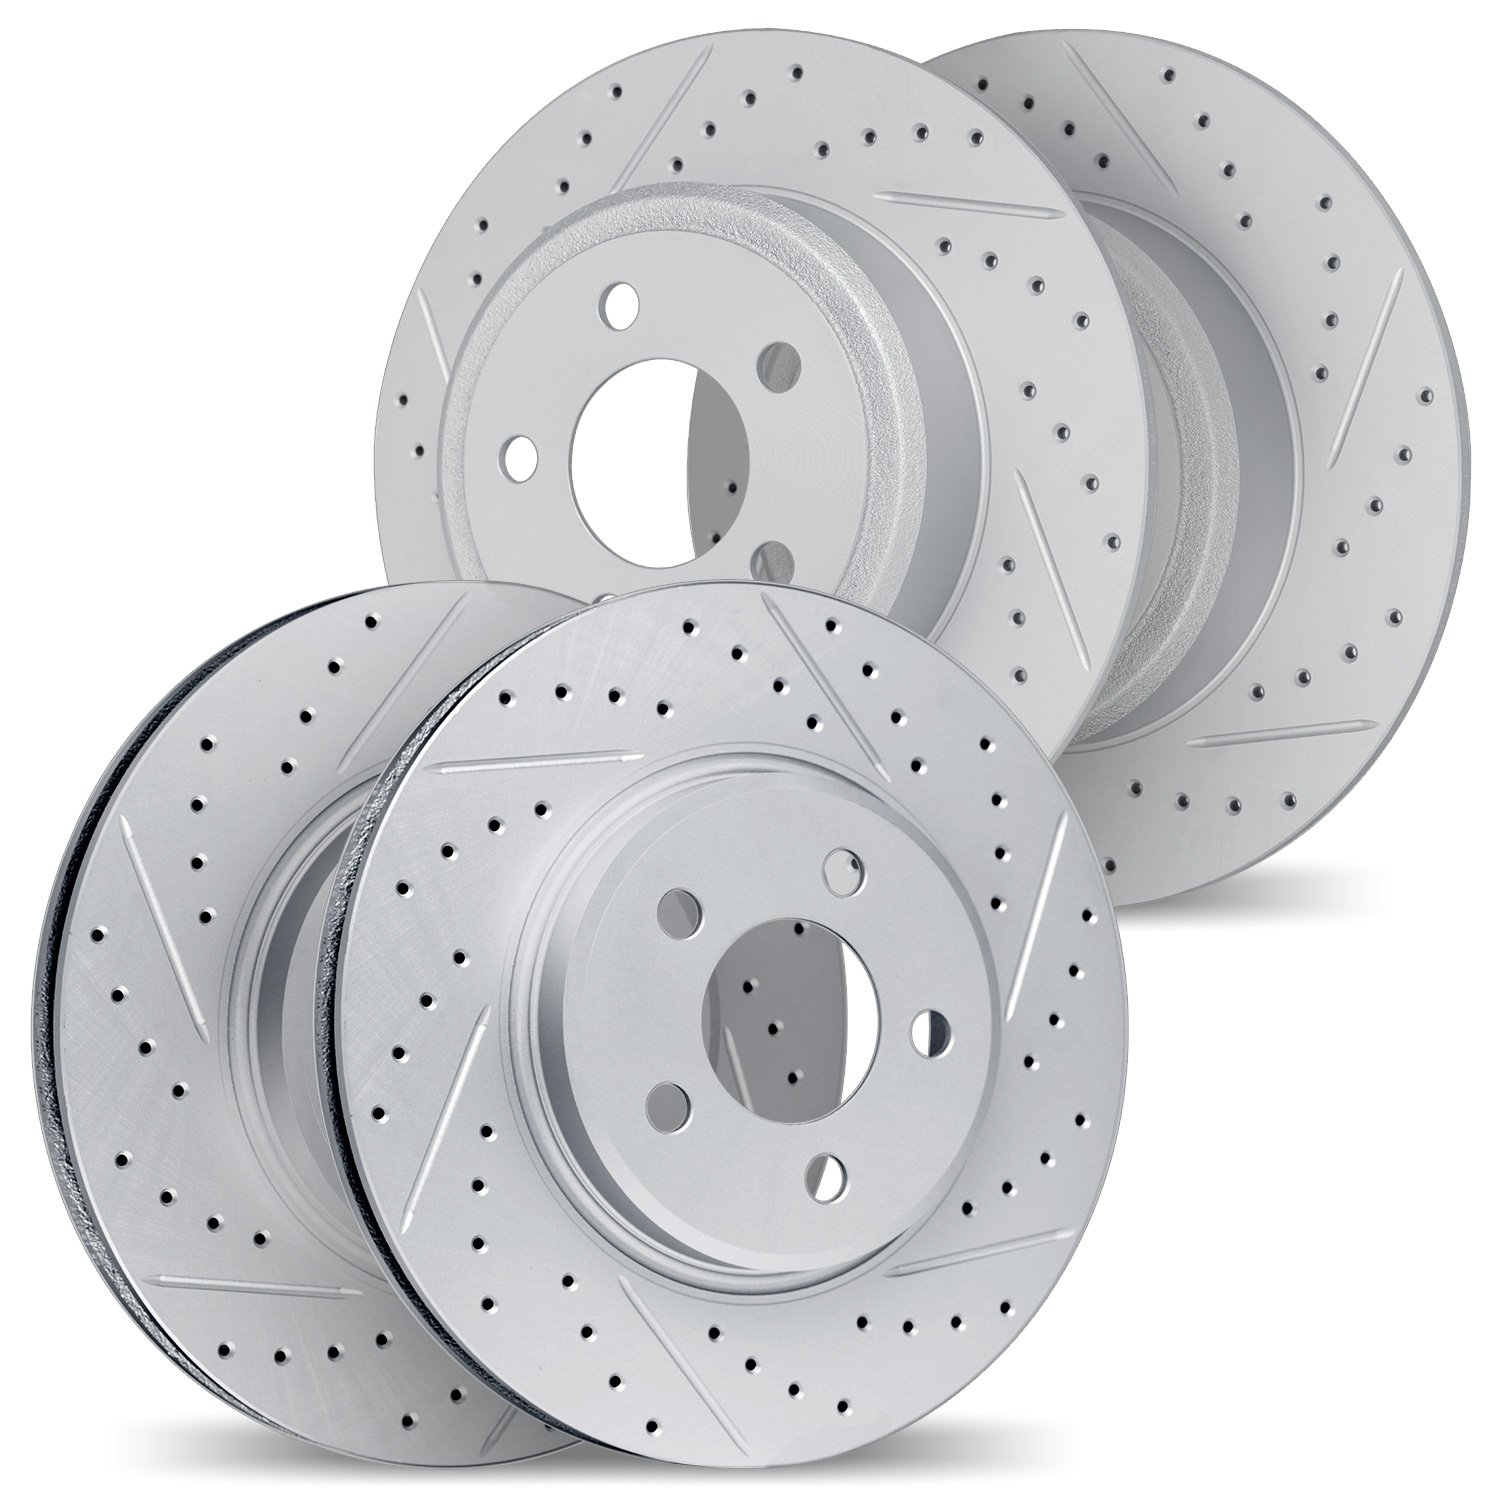 2004-11023 Geoperformance Drilled/Slotted Brake Rotors, 2018-2019 Land Rover, Position: Front and Rear